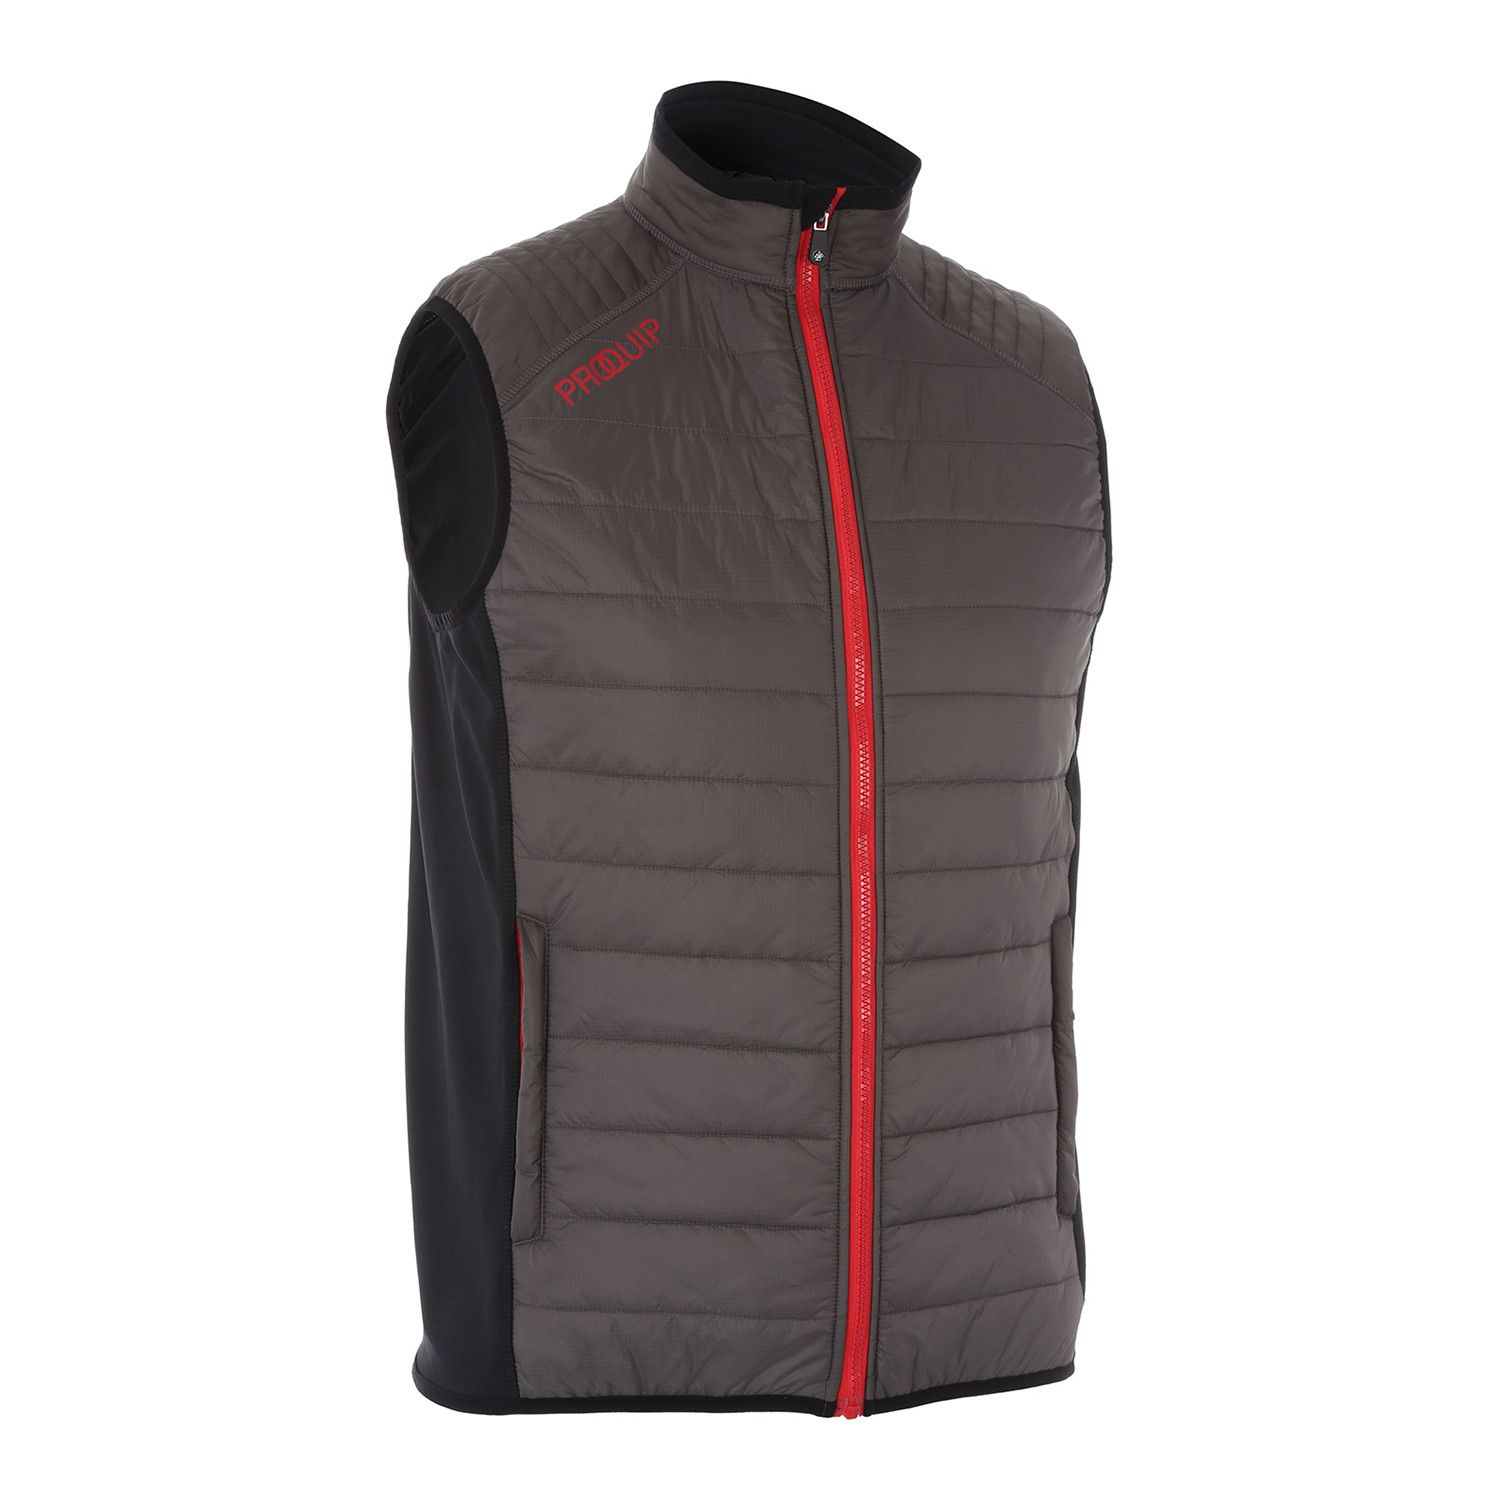 Therma Tour Gilet // Steel Grey (S) - ProQuip Golf USA - Touch of Modern